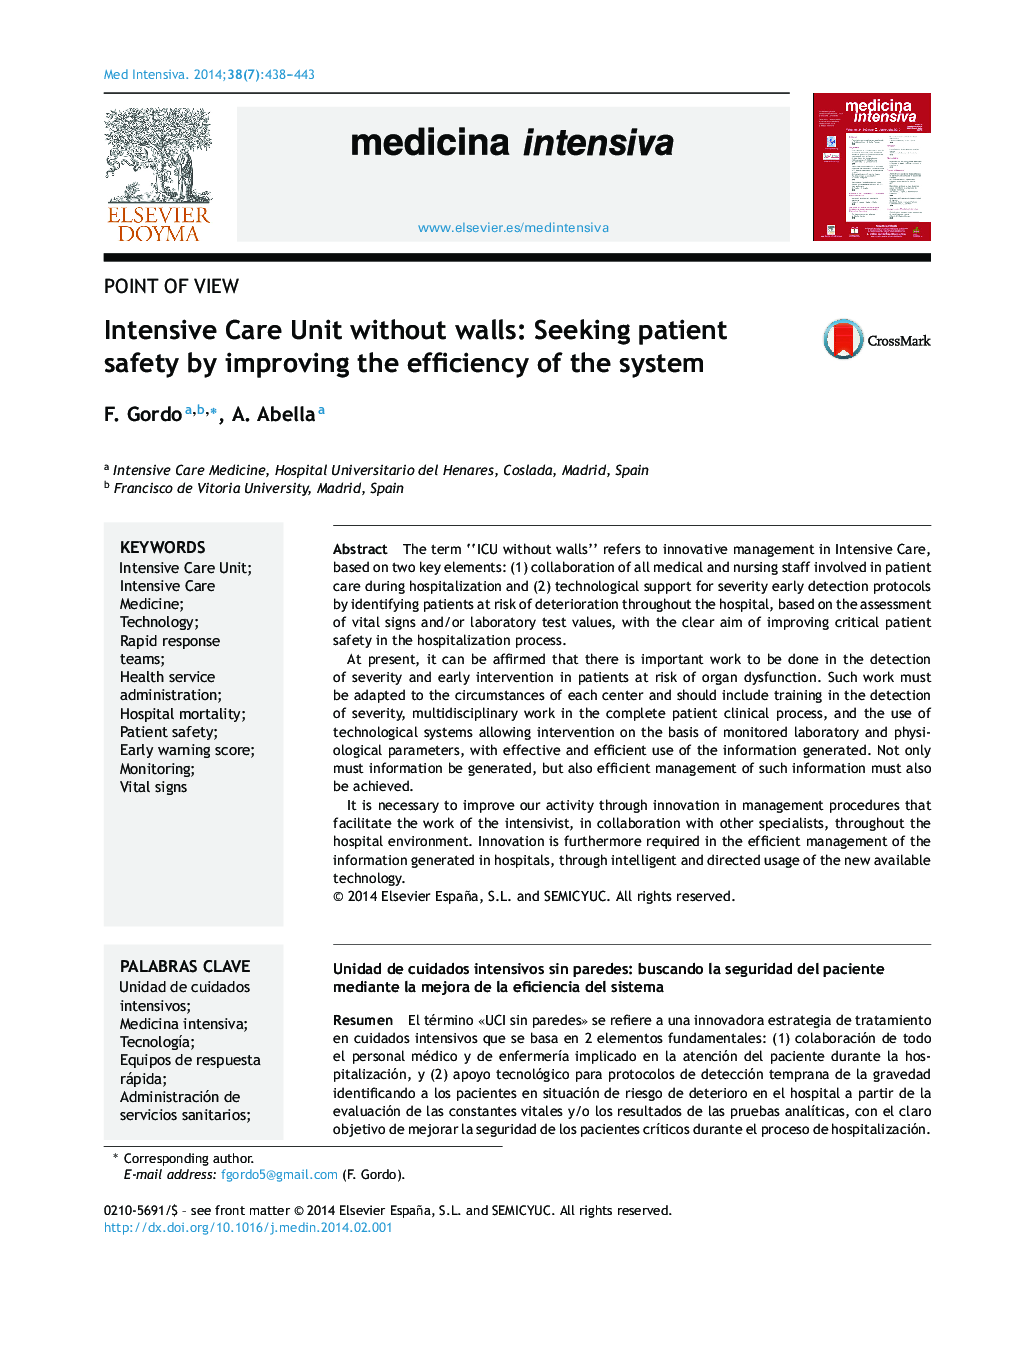 Intensive Care Unit without walls: Seeking patient safety by improving the efficiency of the system